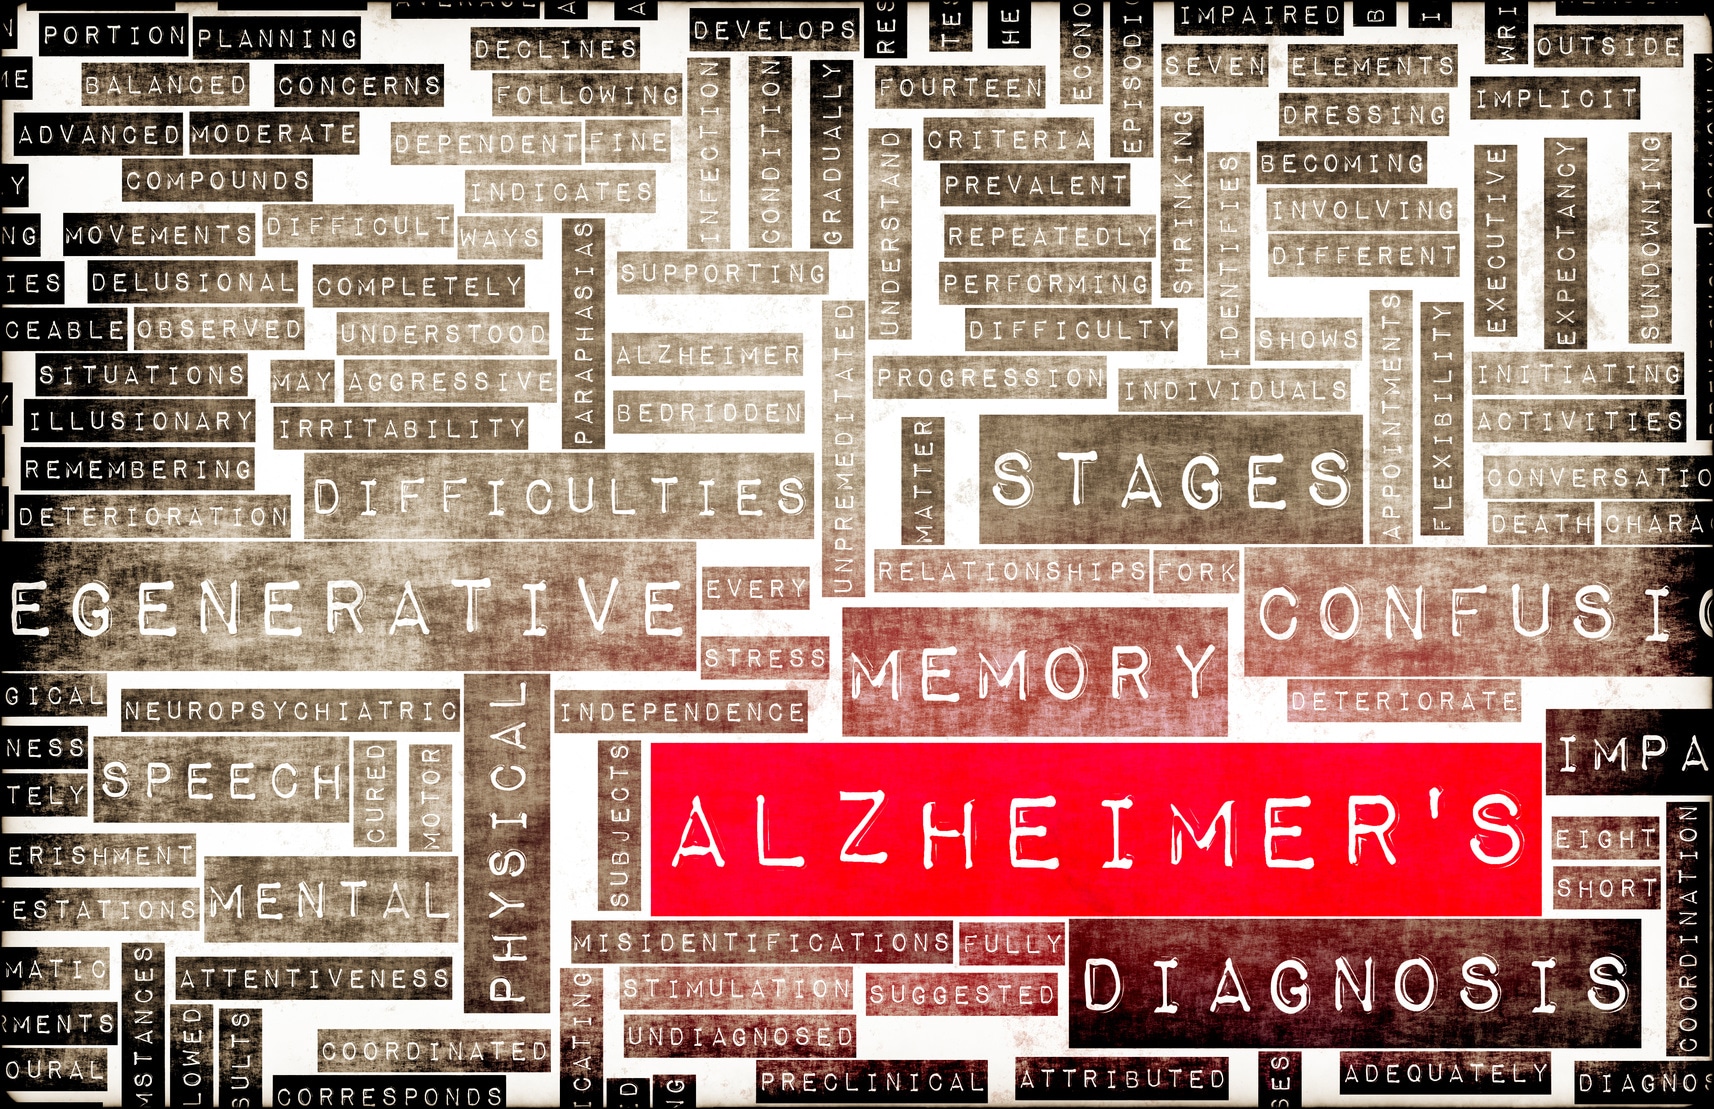 Three Things to Know about Alzheimer’s Disease